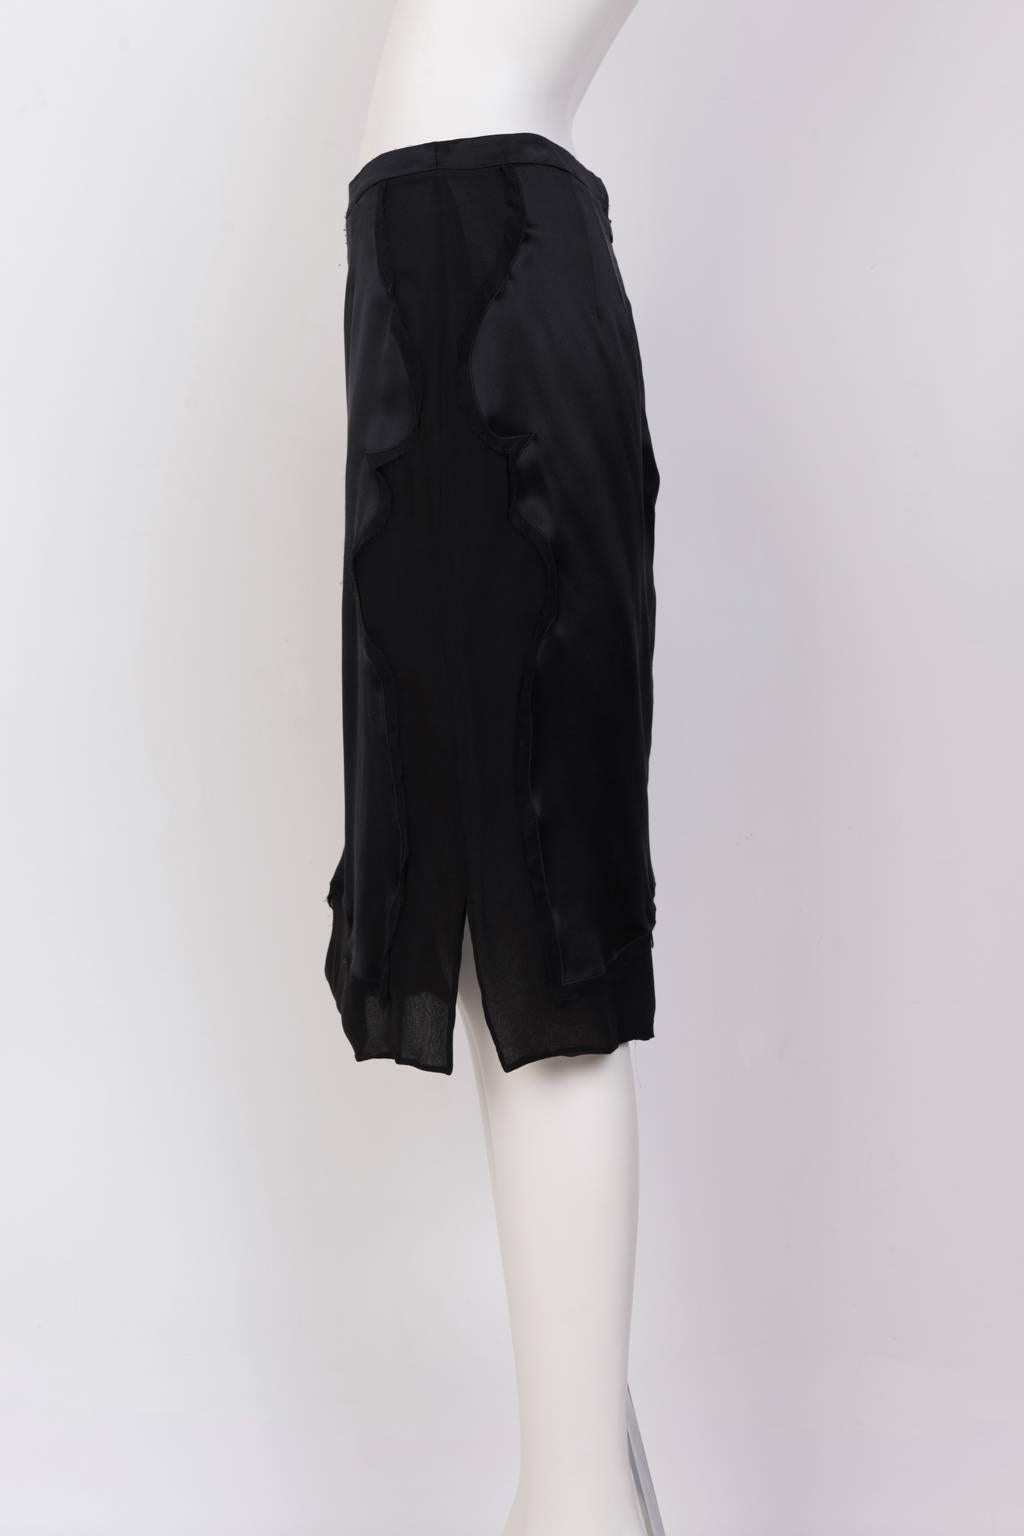 YVES SAINT LAURENT Pencil Skirt In Black Satin And Silk Crepe In Excellent Condition For Sale In Xiamen, Fujian